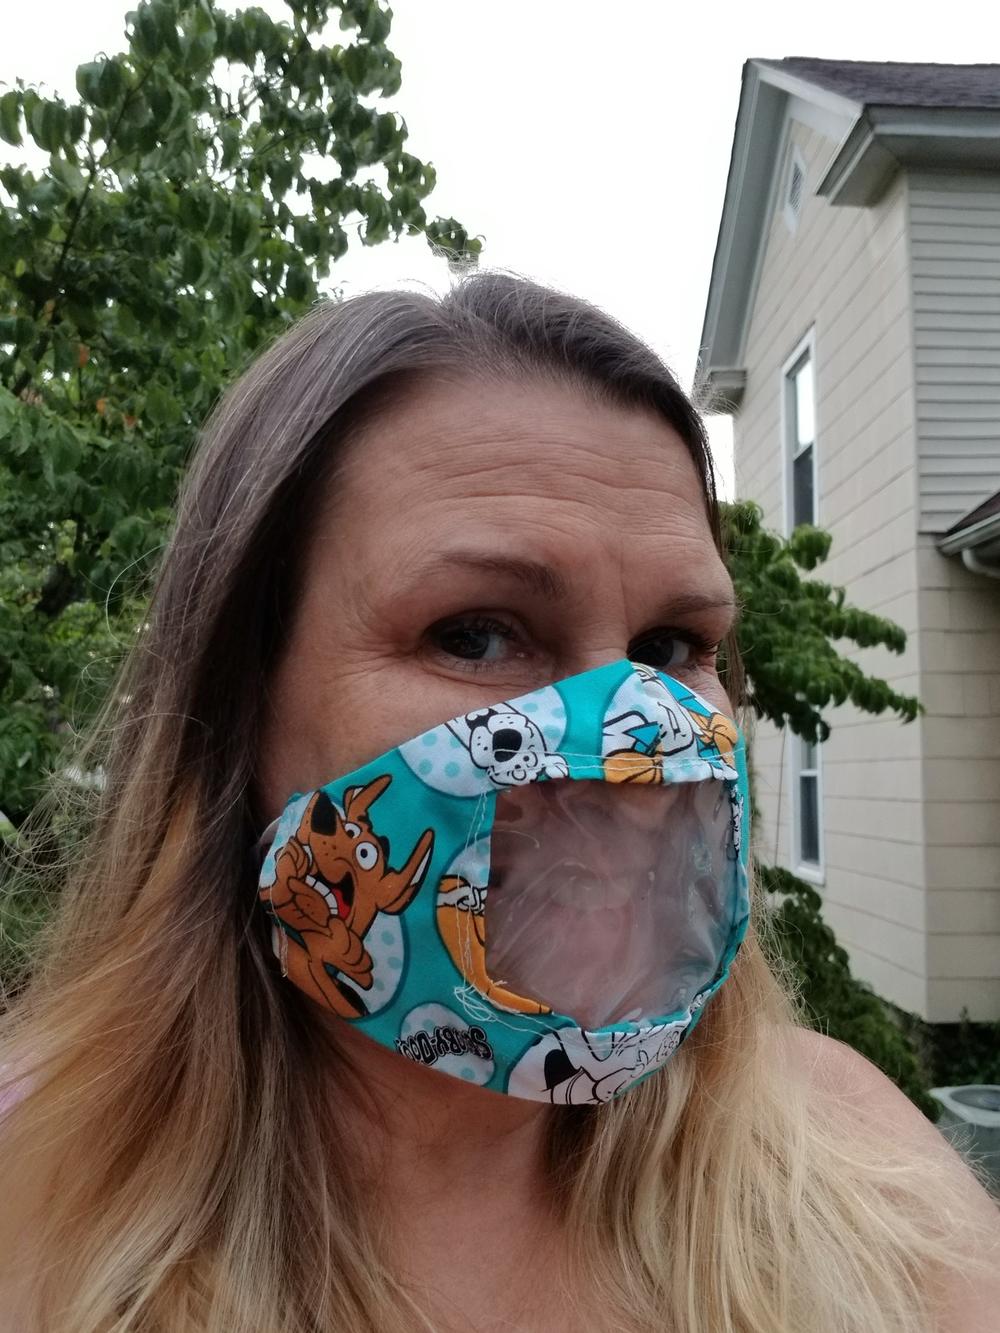 Karen Franks, the volunteer who made the mask used by Jessica Cournoyer and Blake Blackmon when their baby was born, is a North Carolina elementary school music teacher who recently turned to sewing masks — mostly clear ones — to help her community.